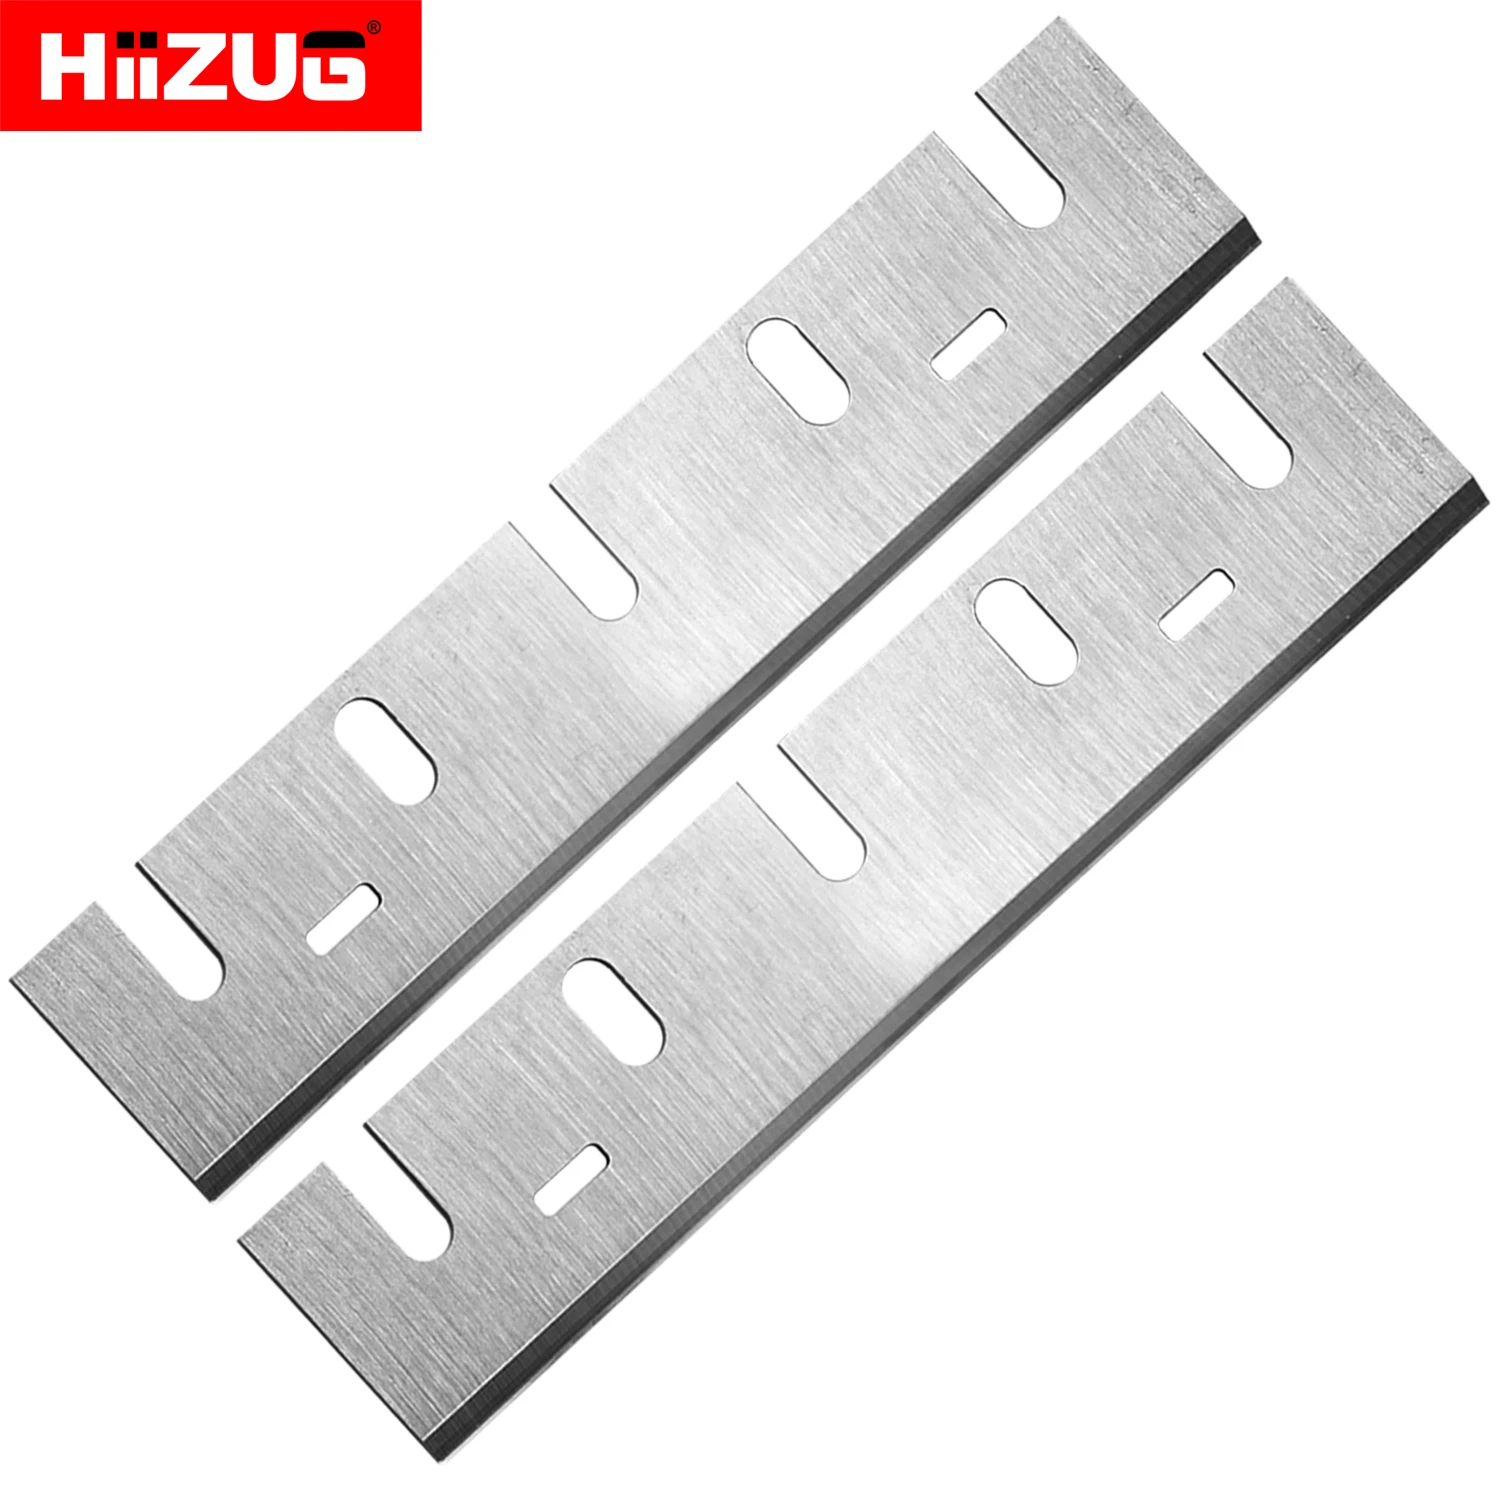 Makita 1806B Wood Planer Blades 6-3/4 Inch 170mm High Speed Steel Set of 2 Pieces grizzly g6702 g0454w 20 inch 508mm×25mm×3mm wood planer jointer blades for thicknesser surface planer set of 4